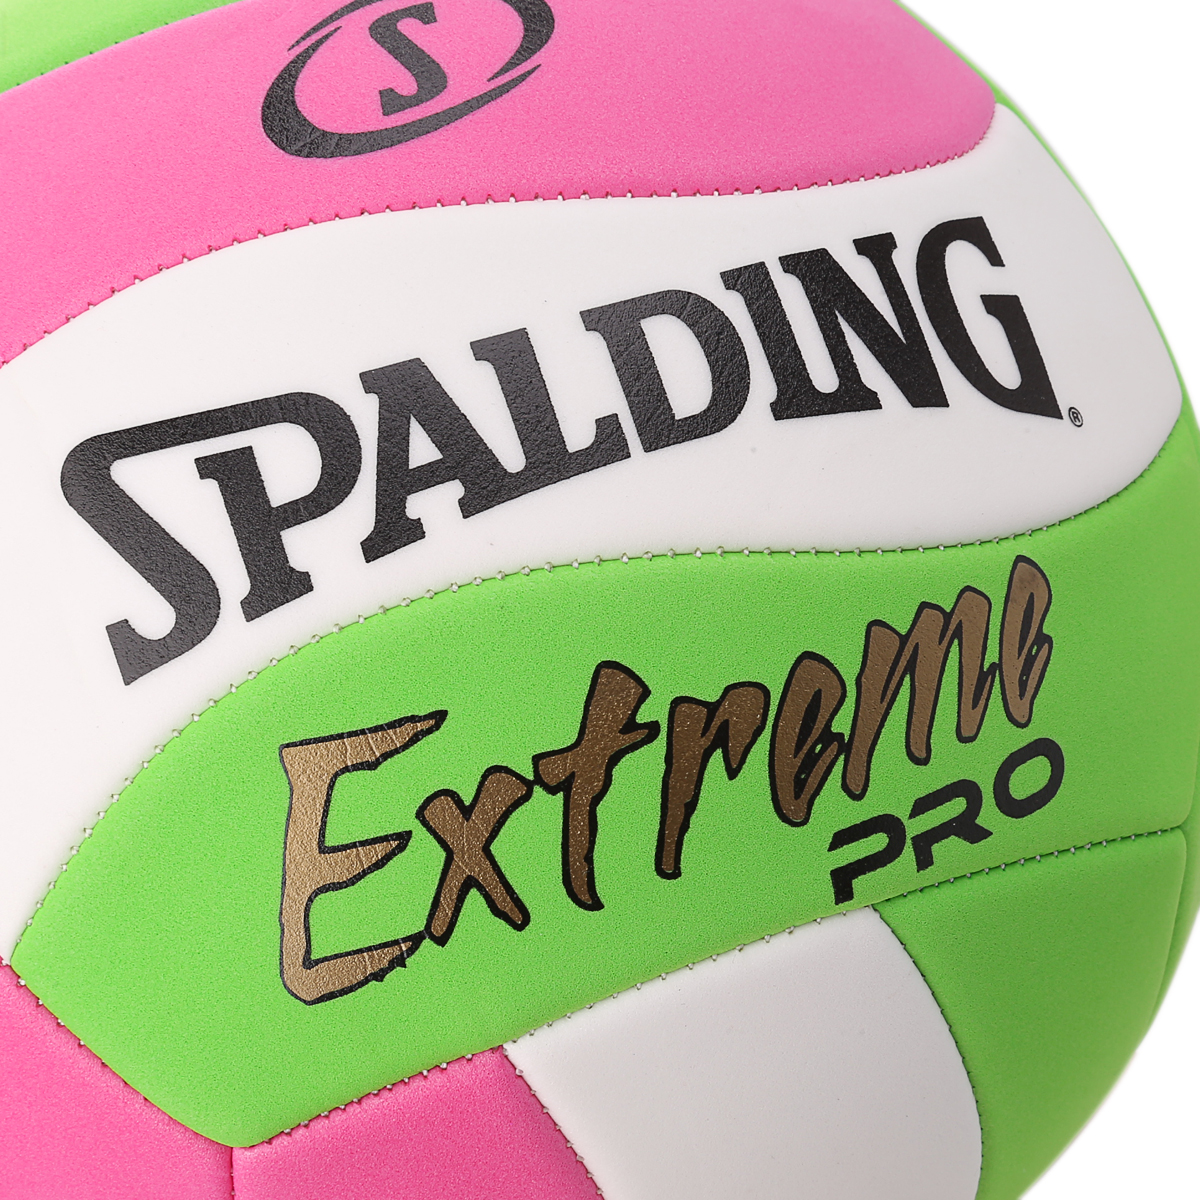 Pelota Spalding Extreme Color,  image number null